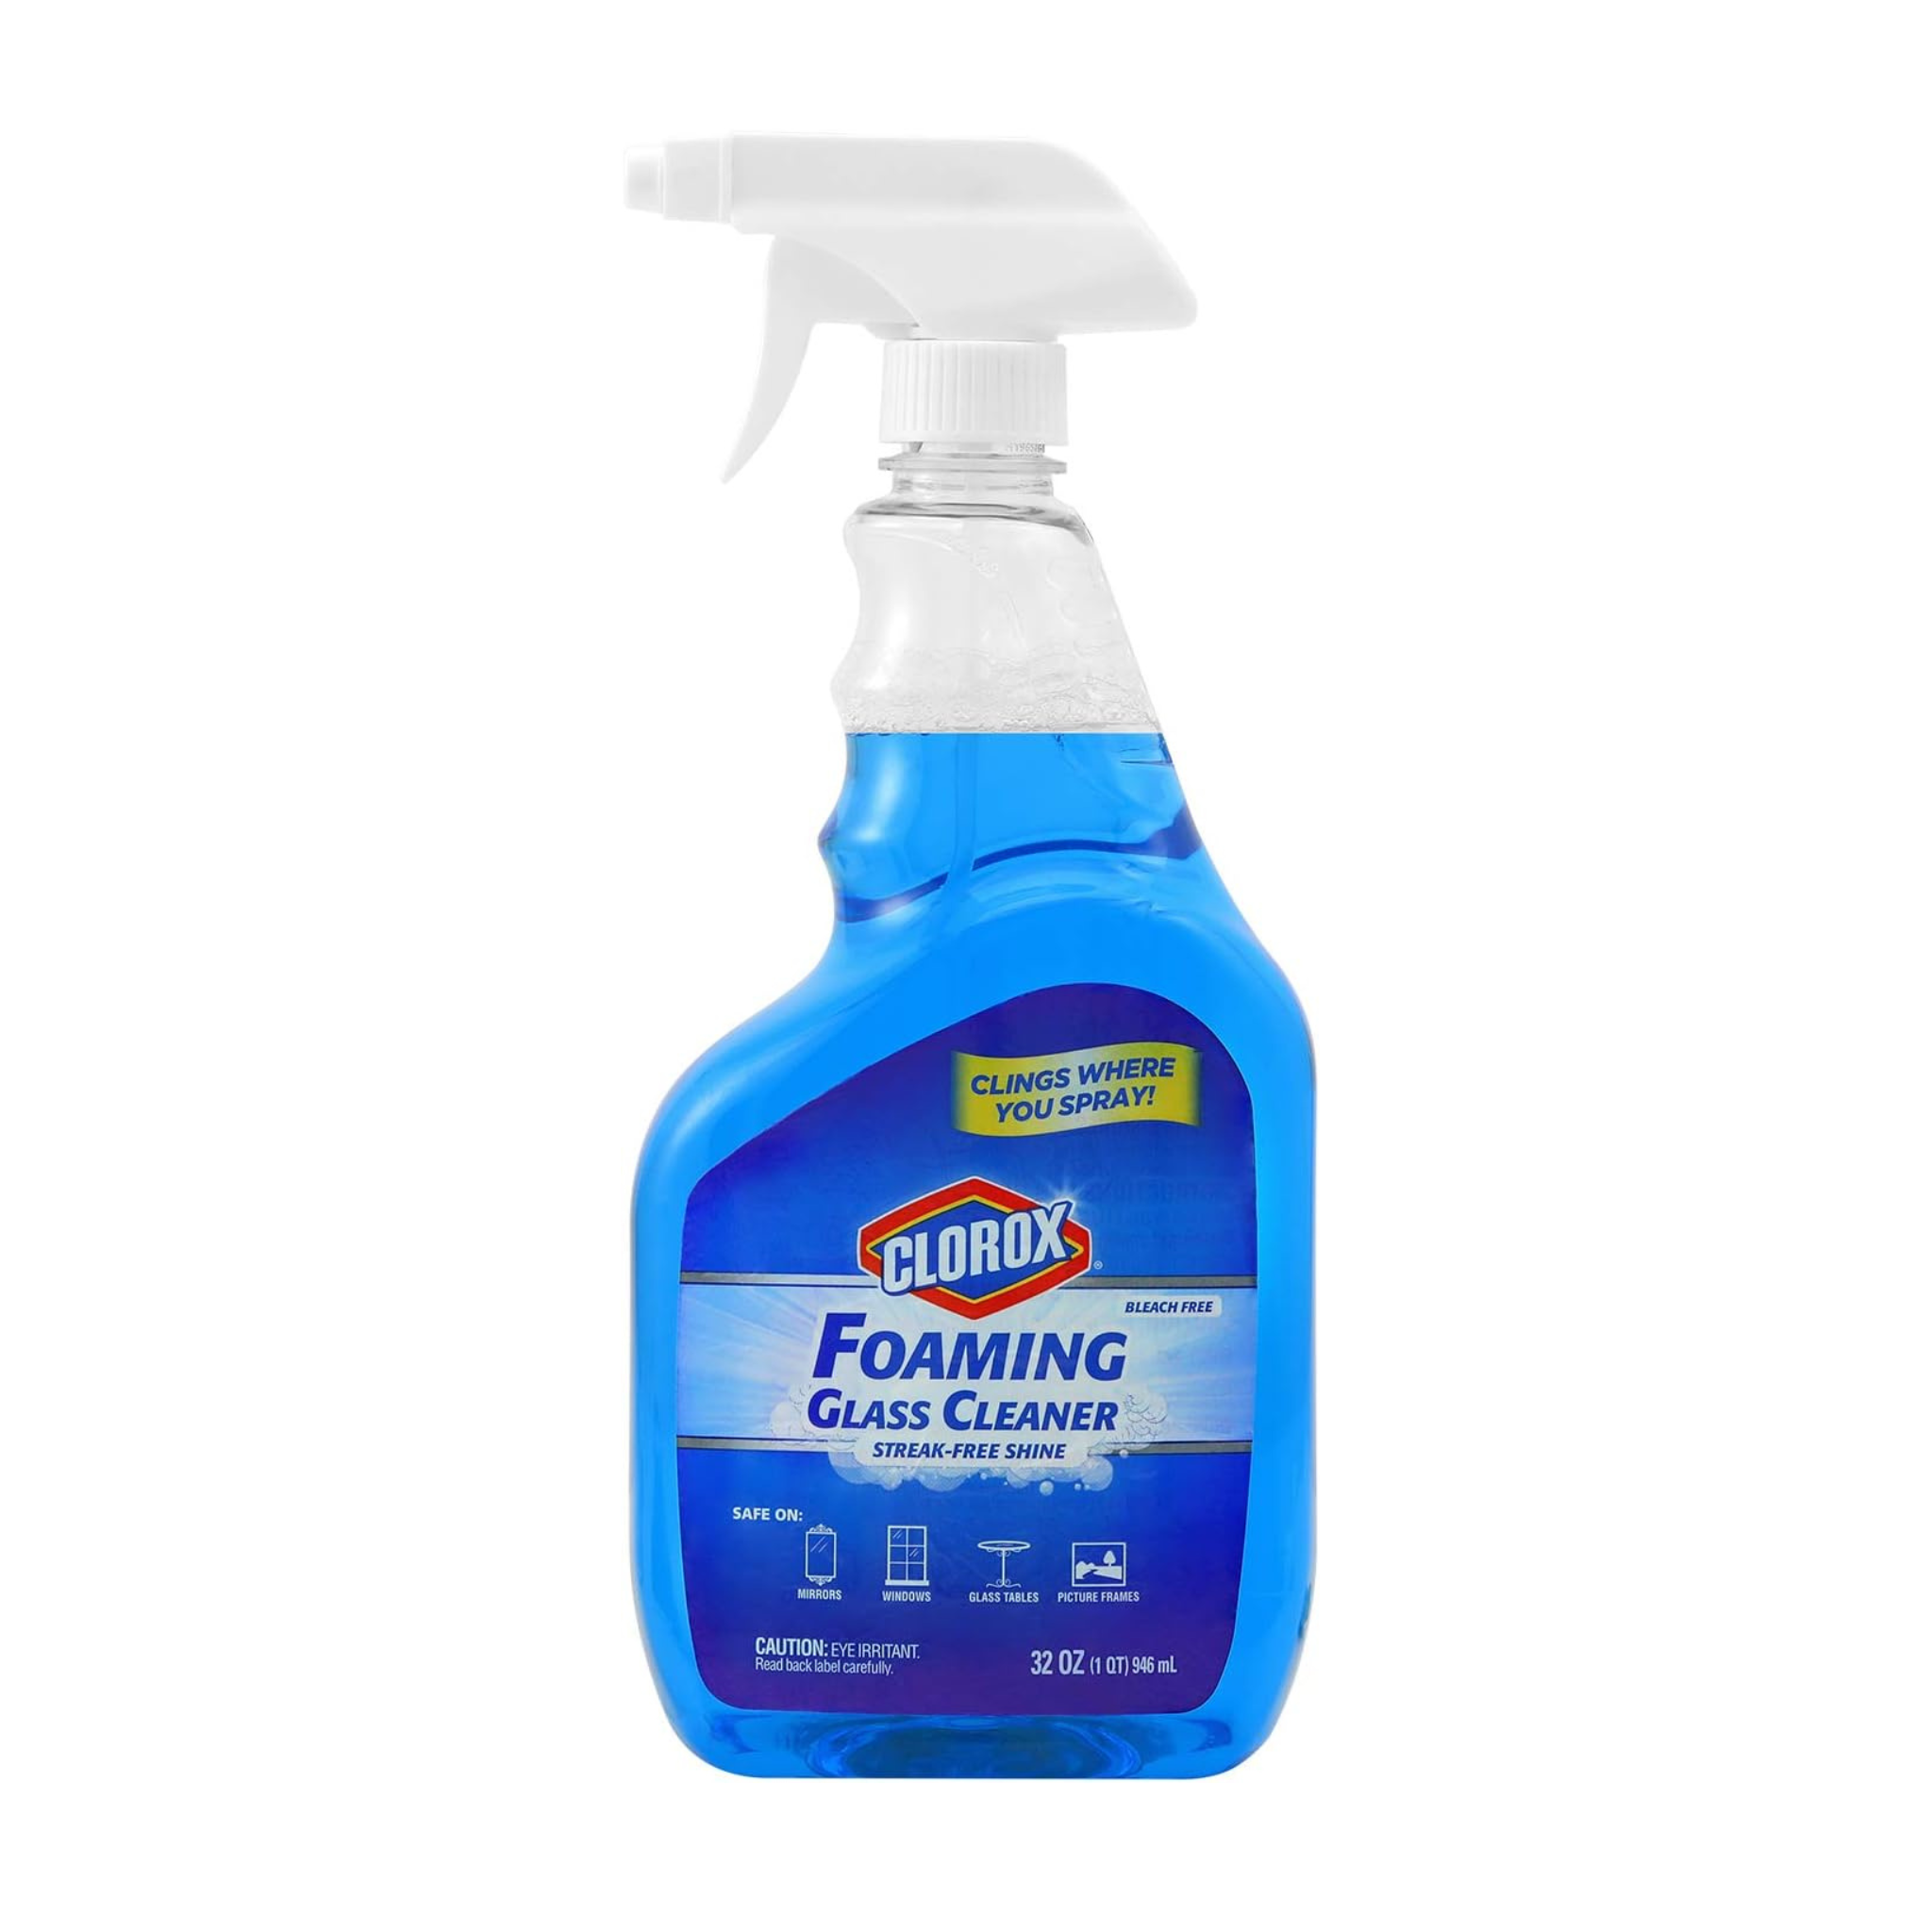 Clorox Foaming Glass Cleaner Trigger Spray